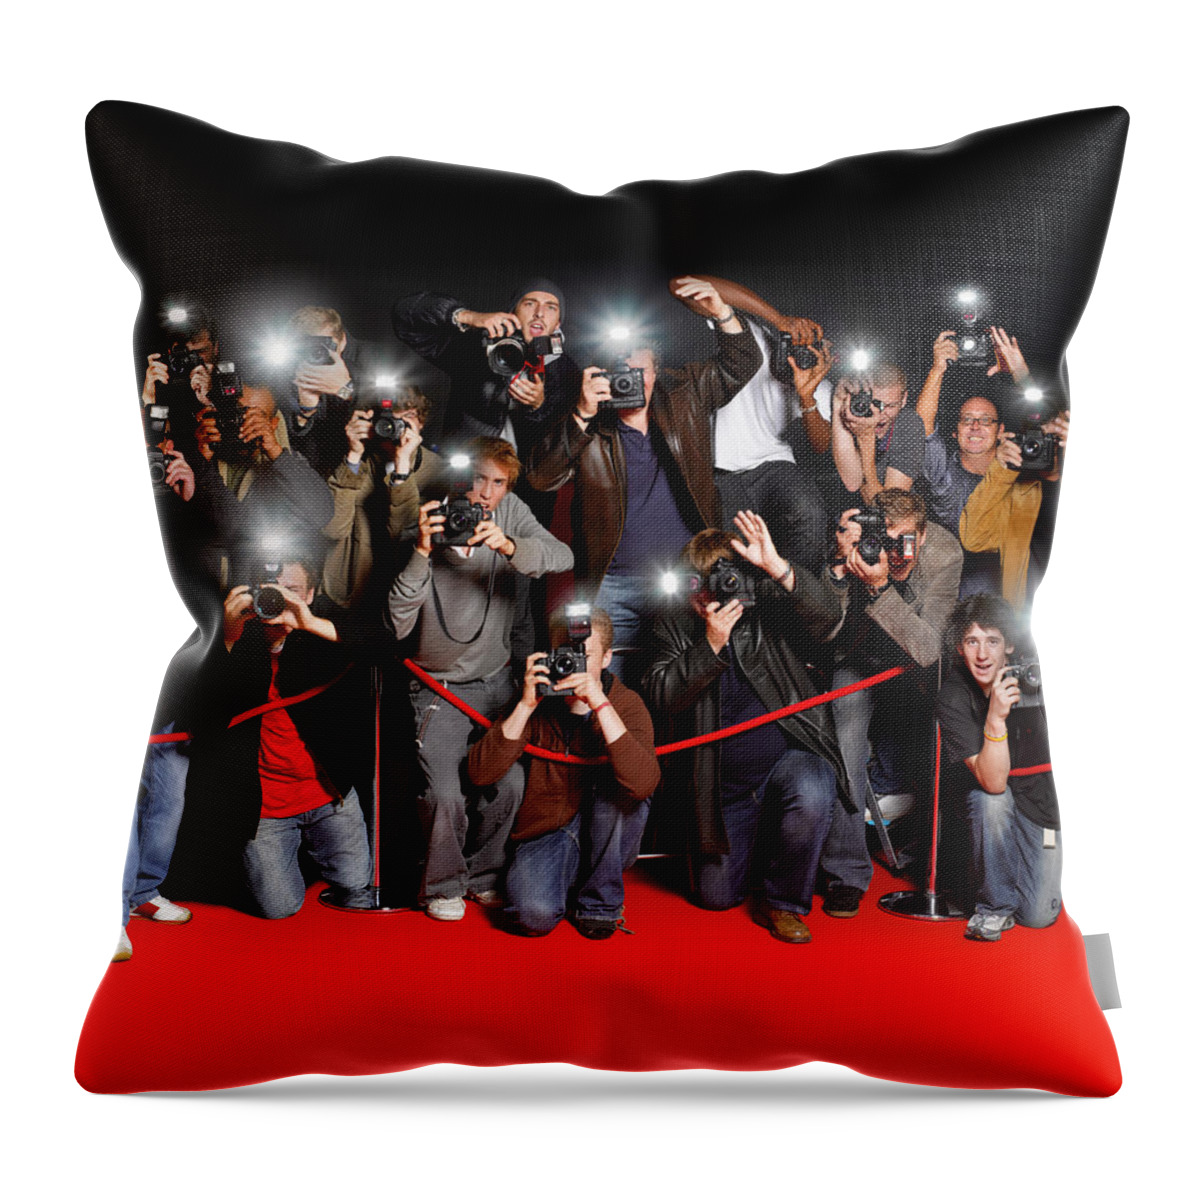 People Throw Pillow featuring the photograph Paparazzi Behind Cordon At Premiere by Peter Dazeley